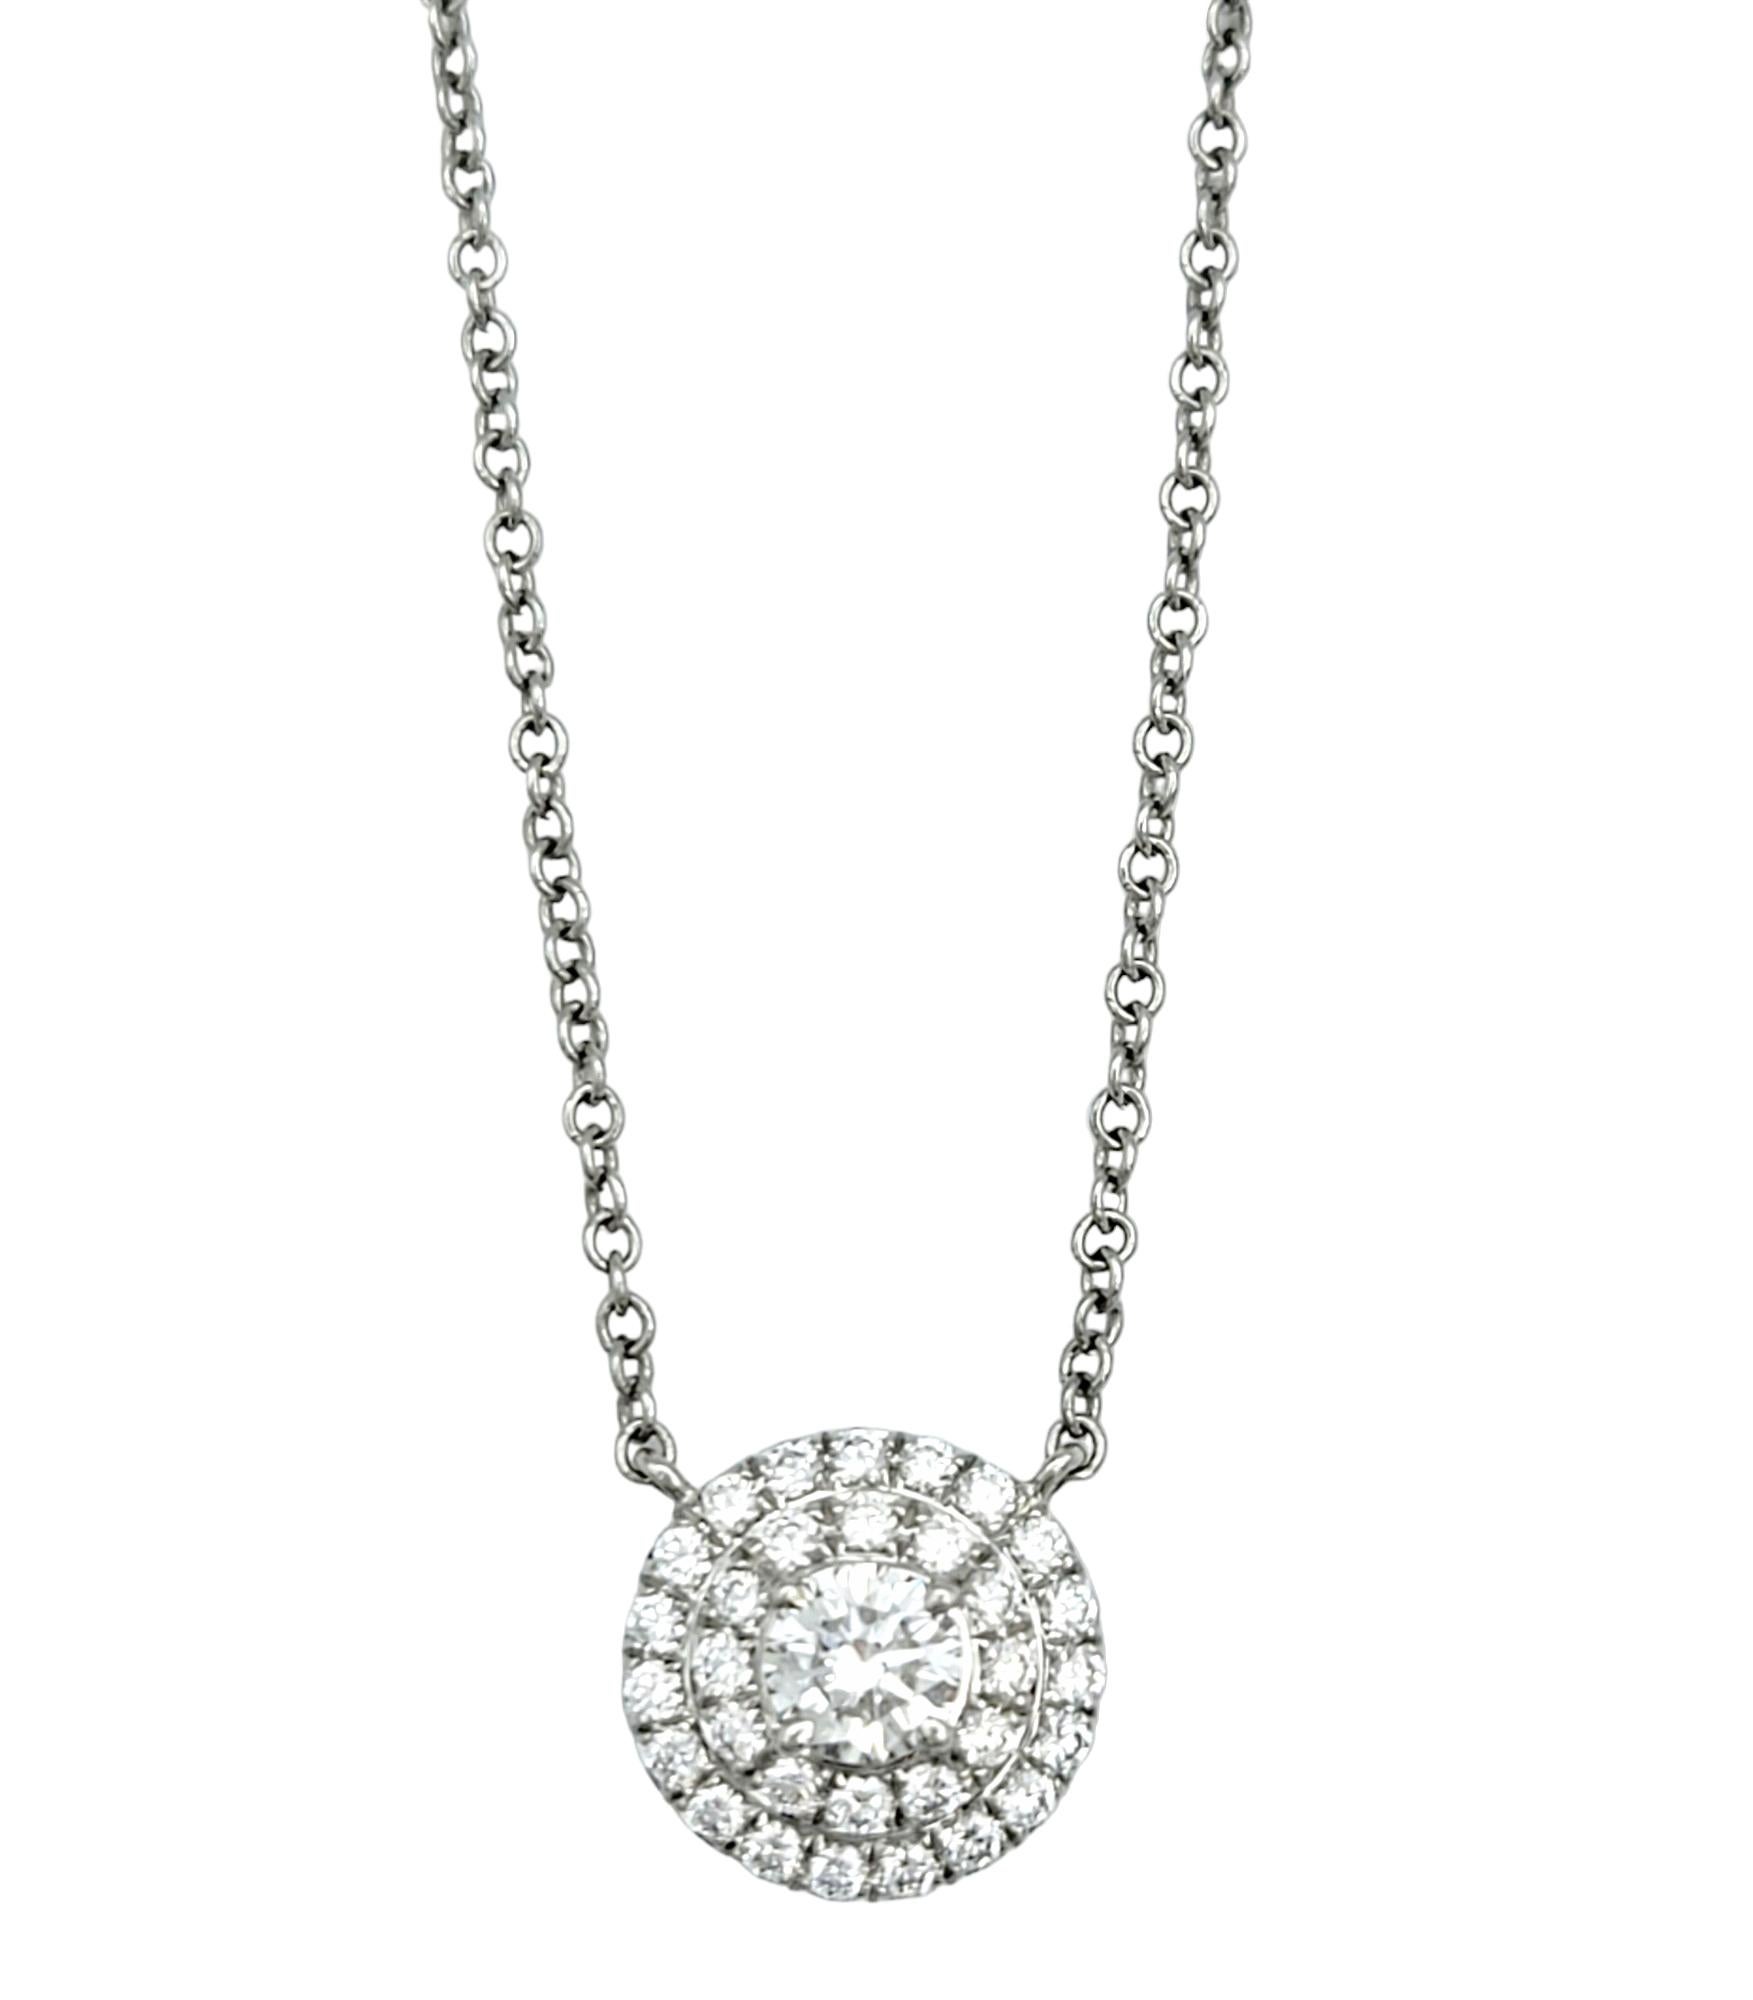 This enchanting necklace from Tiffany & Co. is a testament to the brand's legacy of timeless elegance and exceptional craftsmanship. The focal point of this exquisite piece is the Soleste pendant, meticulously set in platinum to ensure enduring